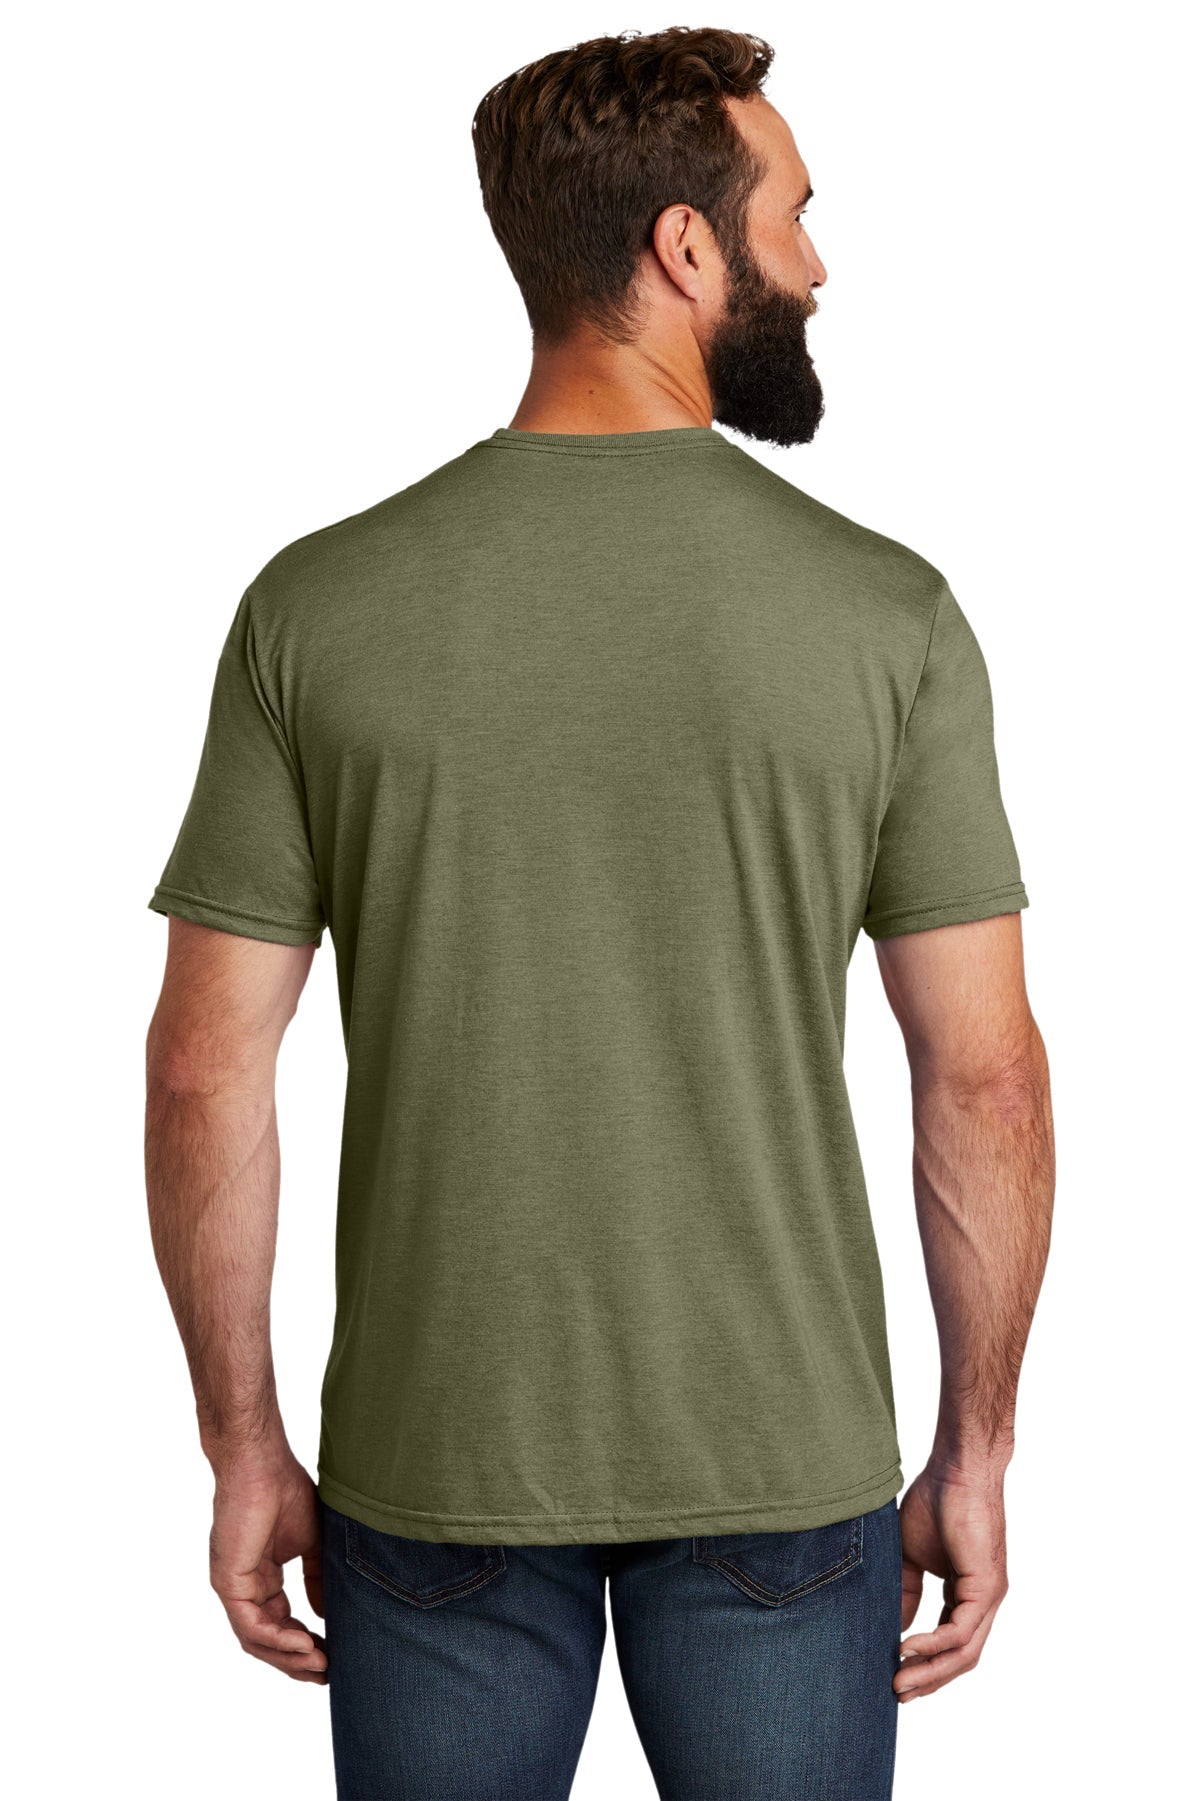 Allmade Unisex Tri-Blend Customized Tee, Olive You Green